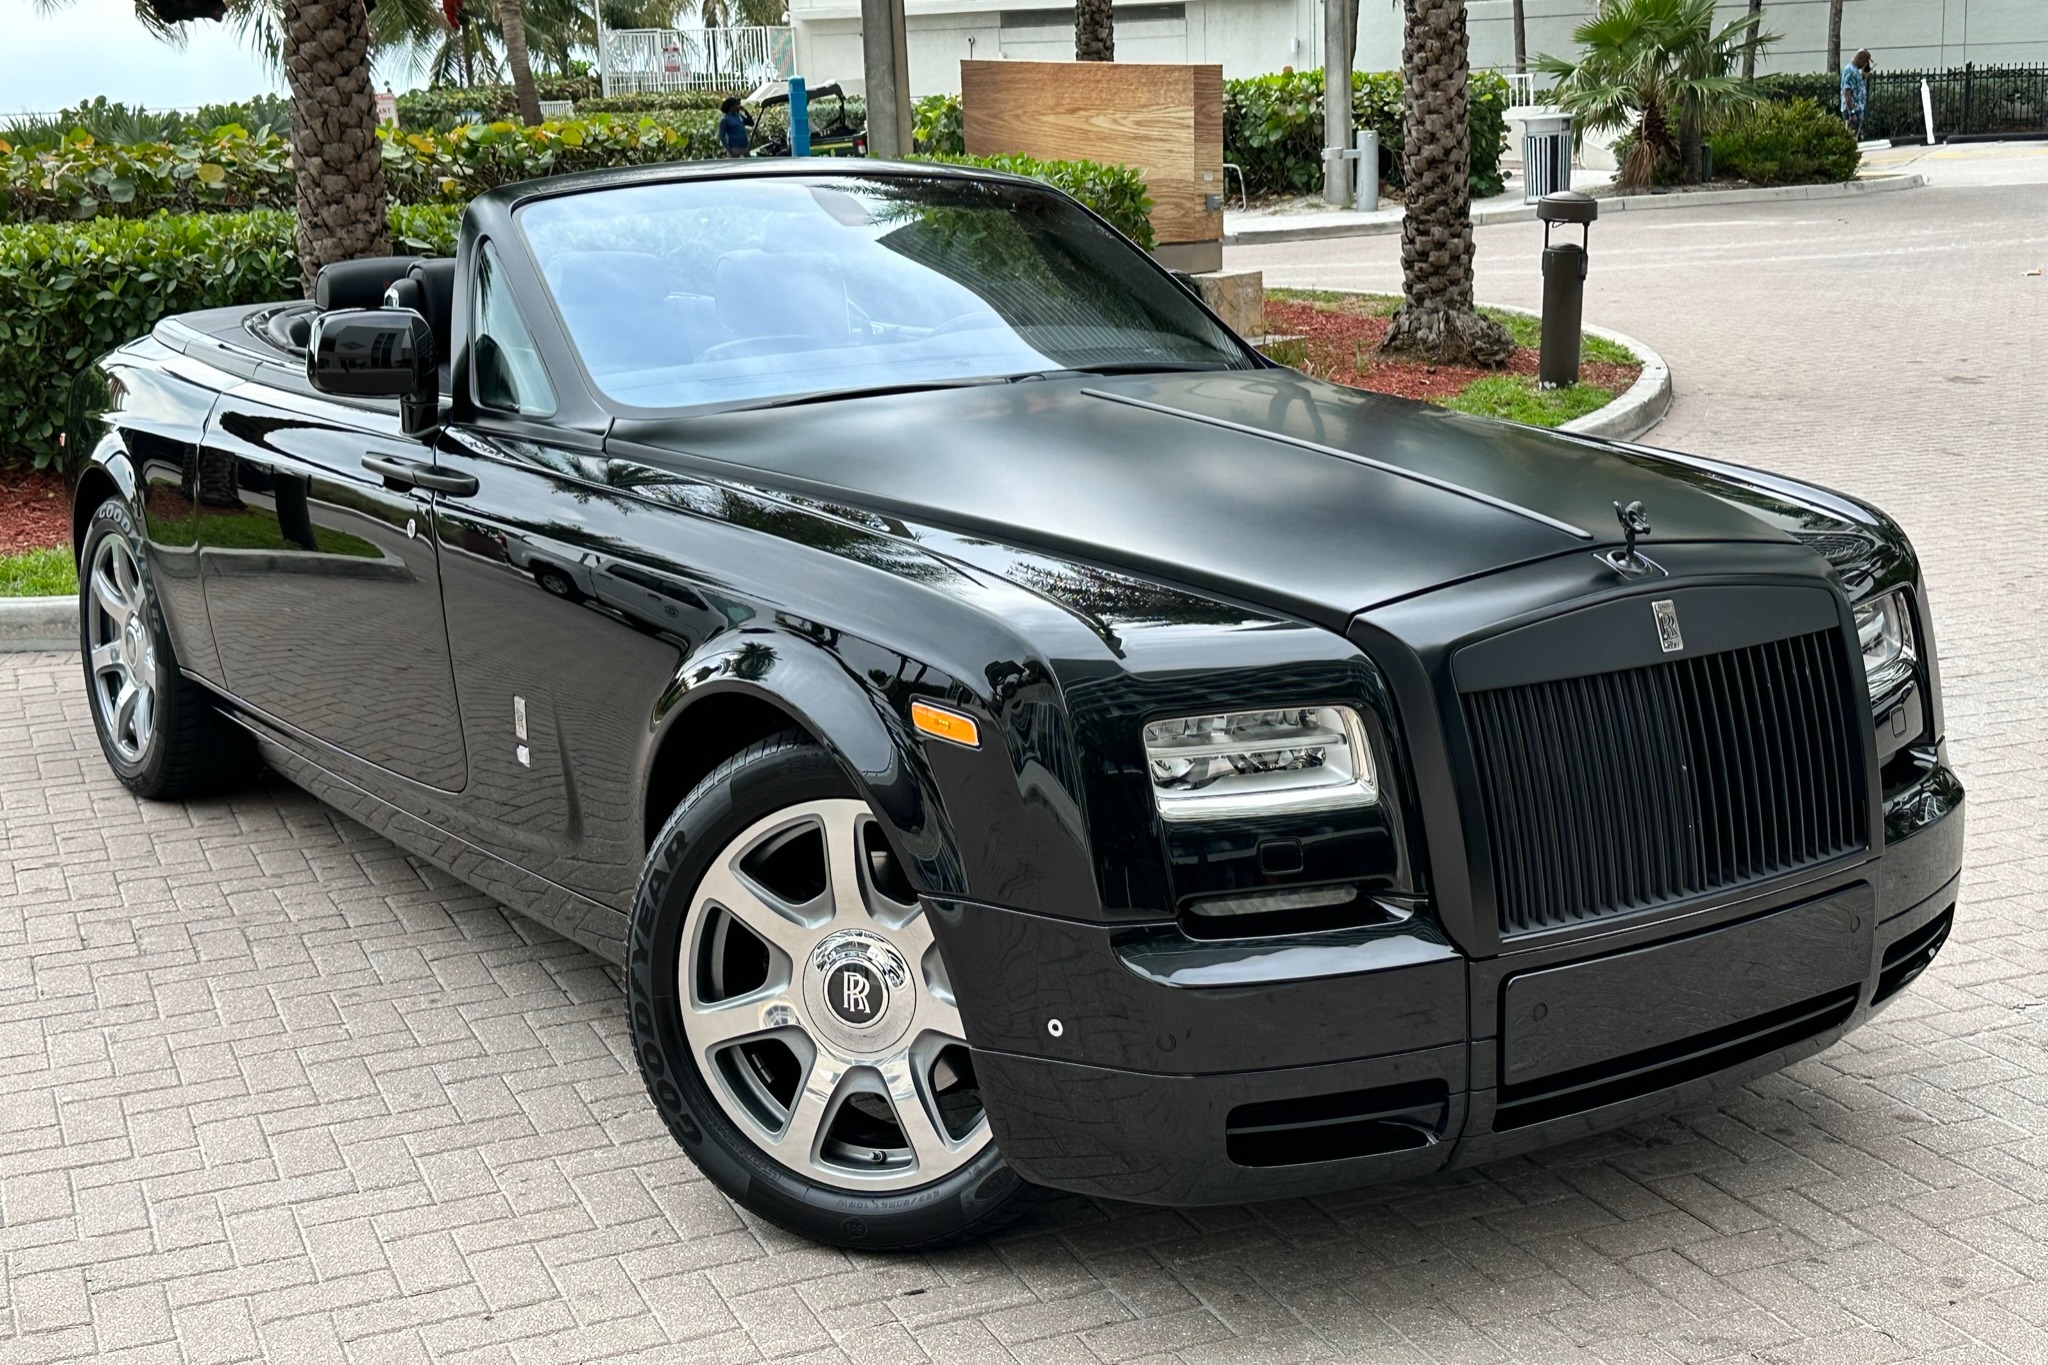 23k-Mile 2015 Rolls-Royce Phantom Drophead Coupe Nighthawk Edition for sale  on BaT Auctions - closed on January 9, 2023 (Lot #95,351) | Bring a Trailer